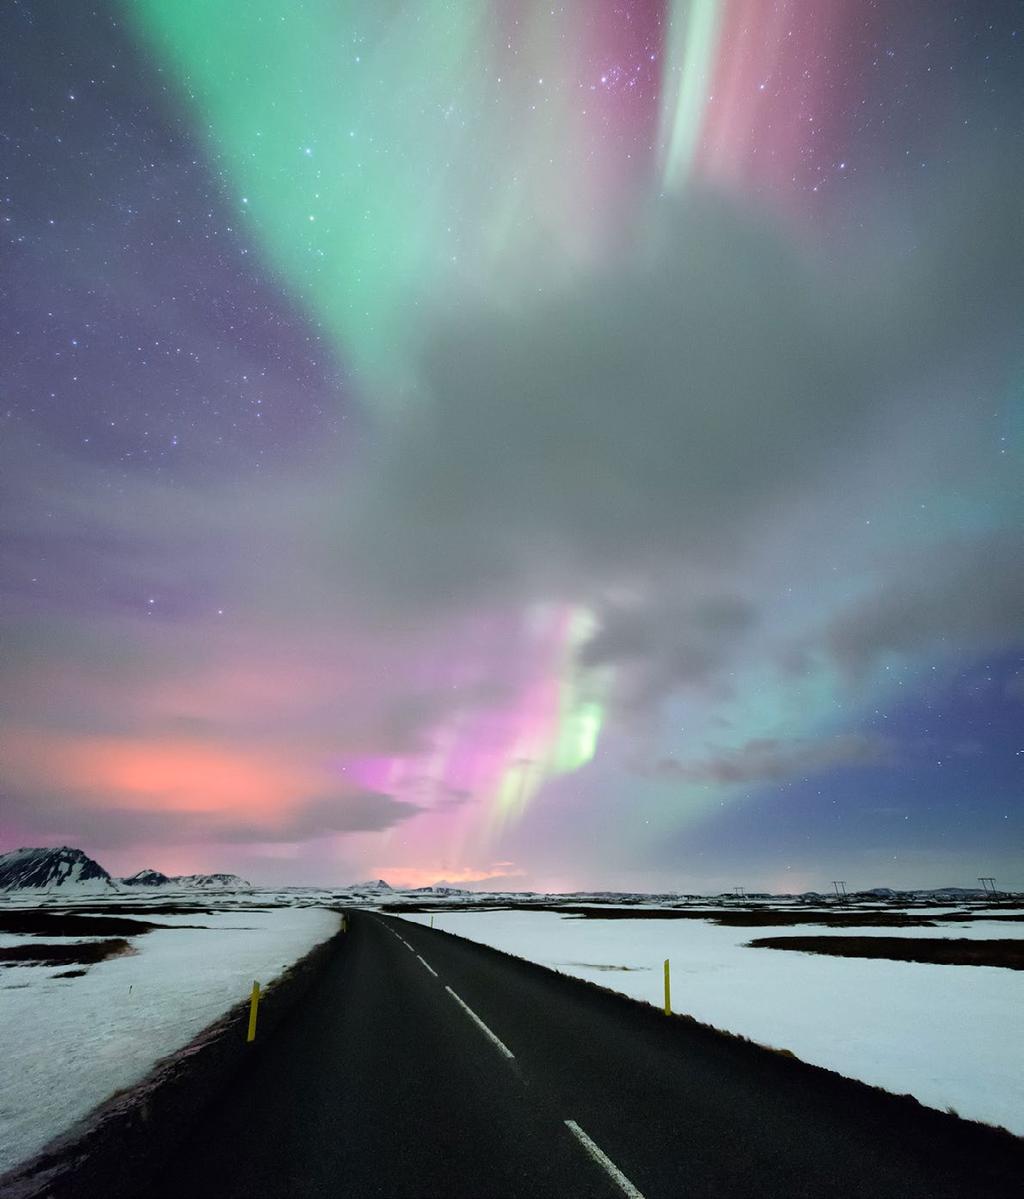 Aurora Borealis Due to it s extreme Northern location, Iceland is one of the best places in the world for photographing the Northern Lights.